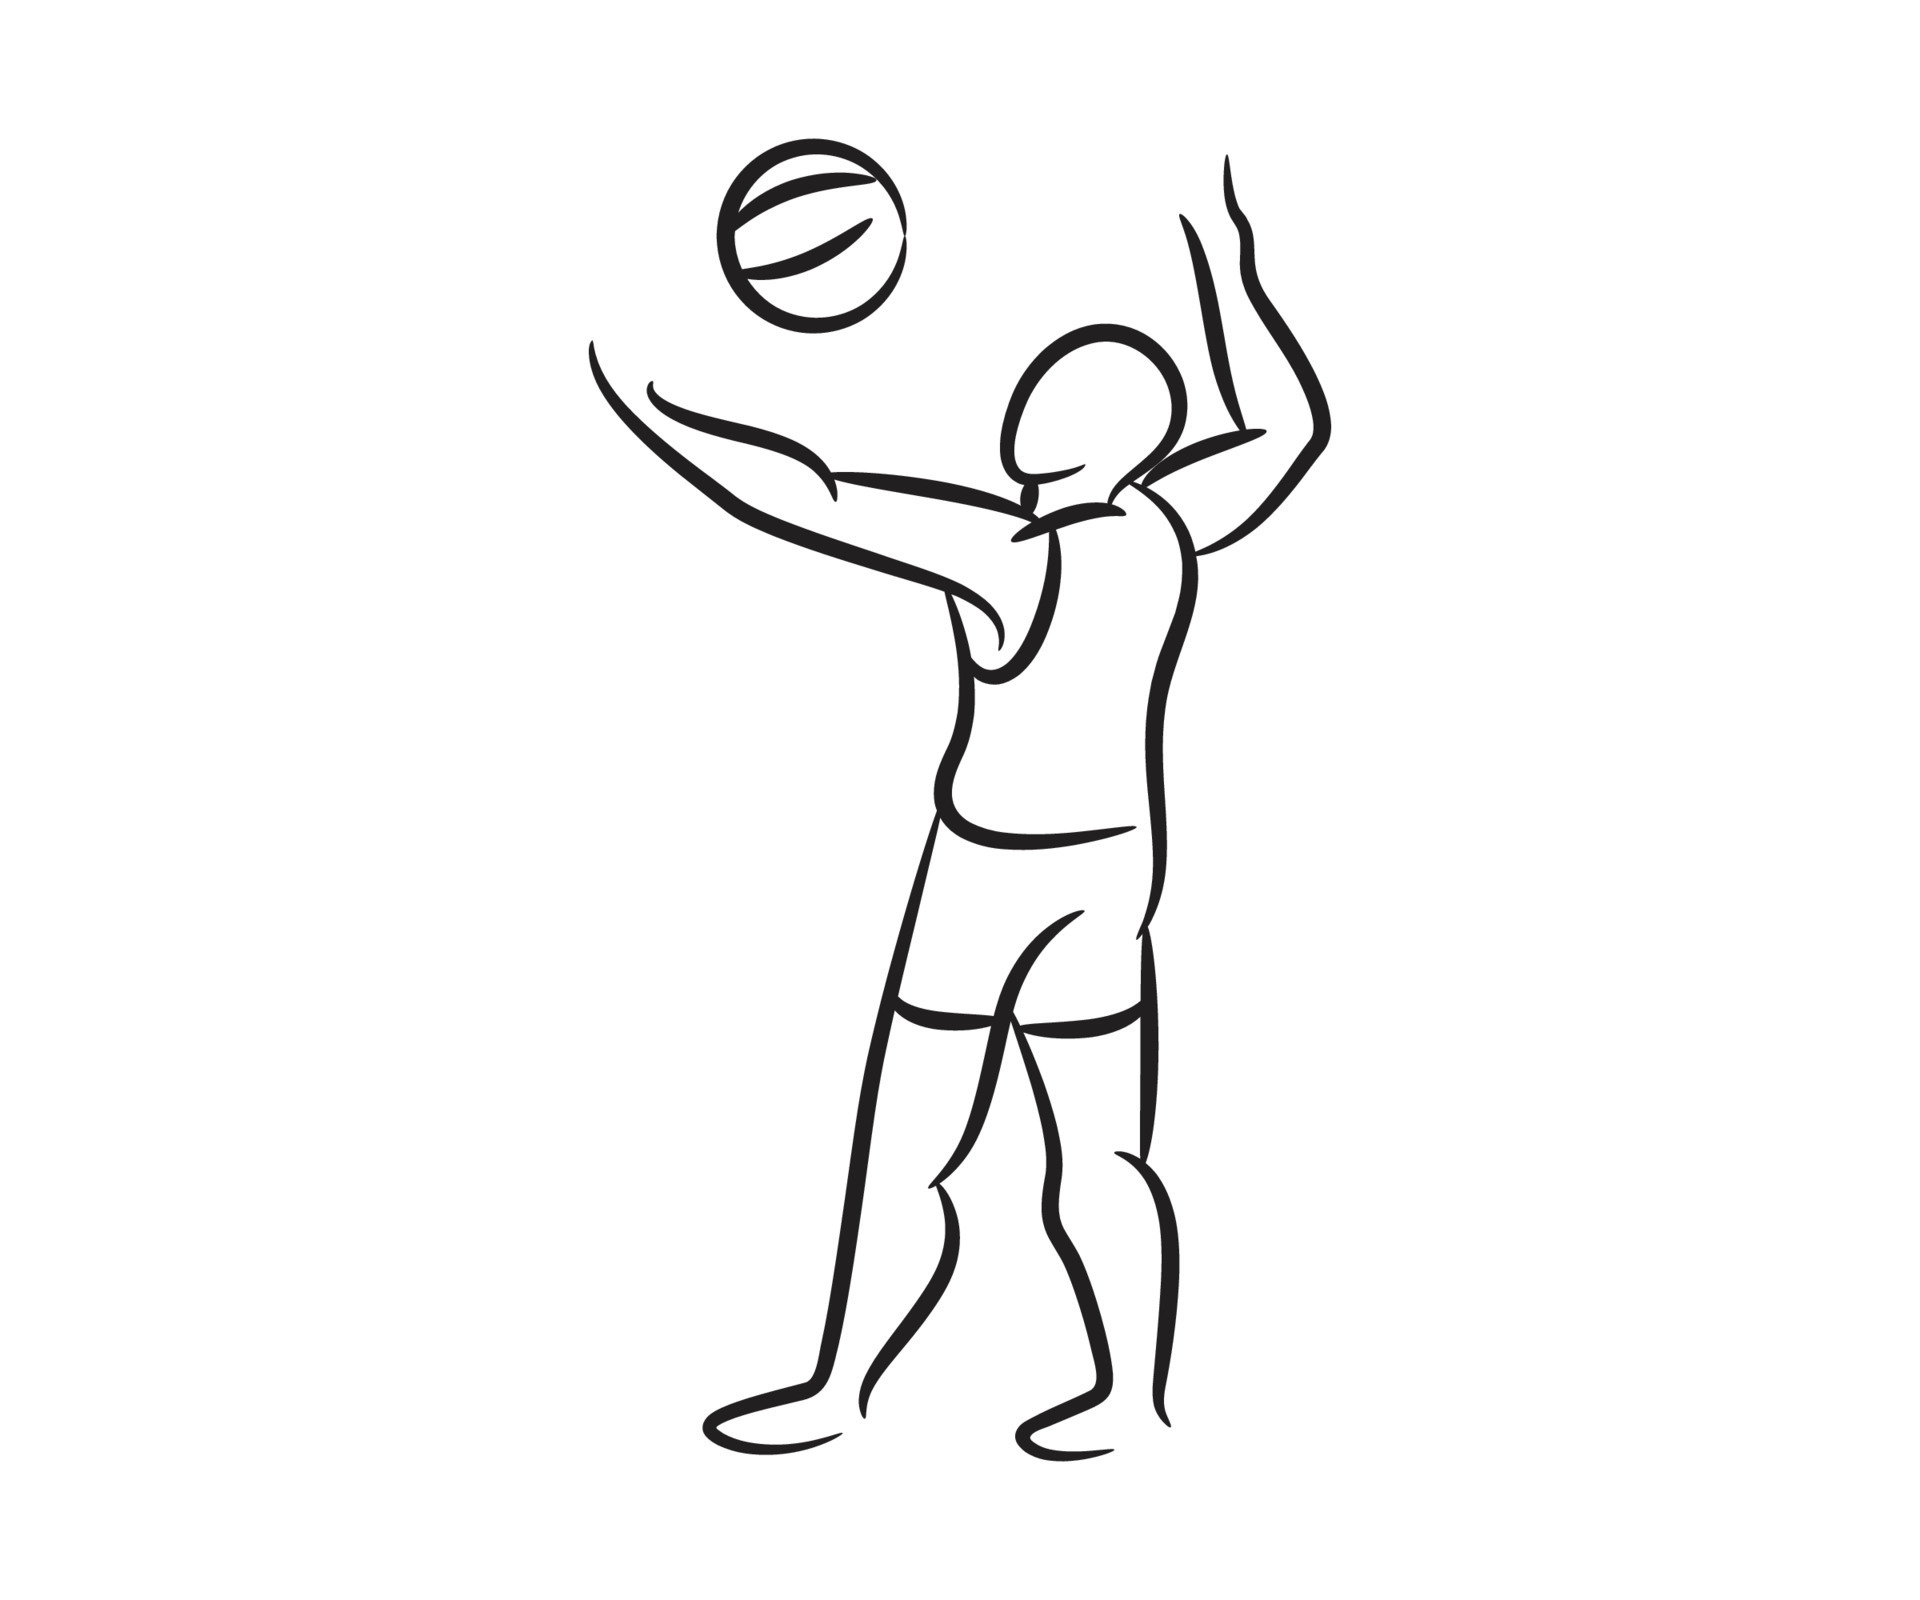 Volleyball Drawing Images - Free Download on Freepik